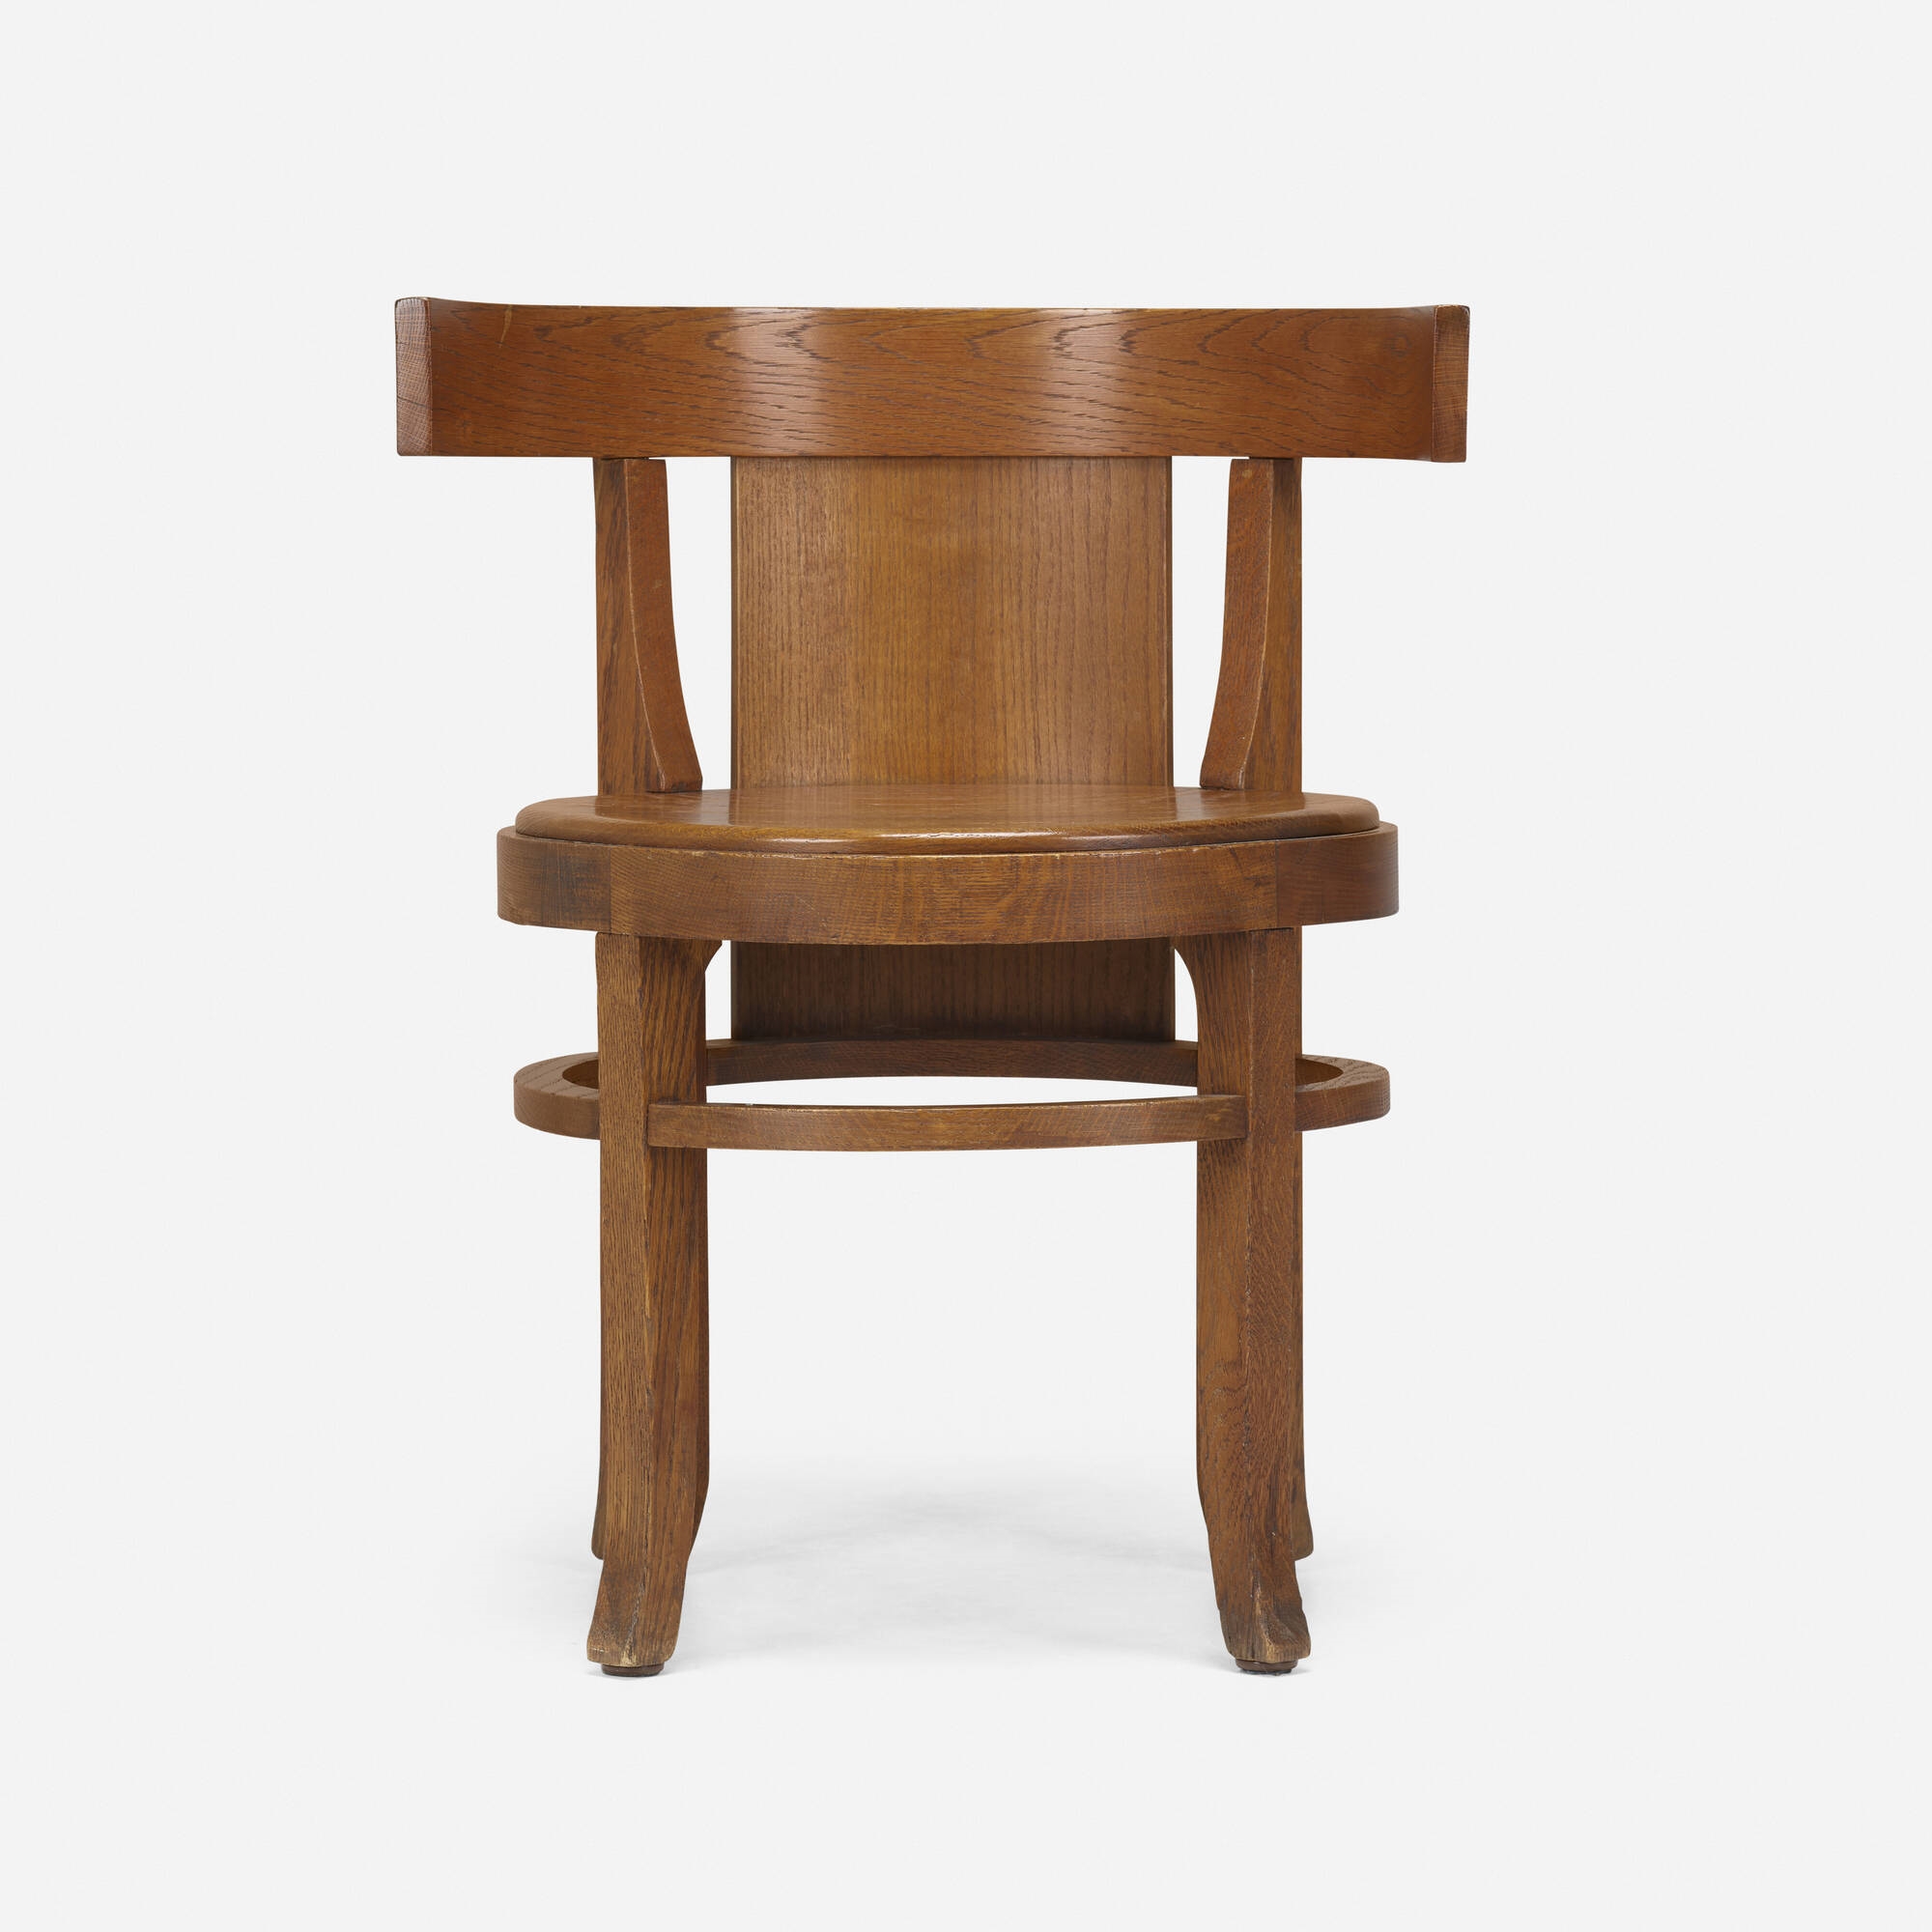 Frank Lloyd Wright | Barrel-back chair from the Frank L. Smith Bank ...